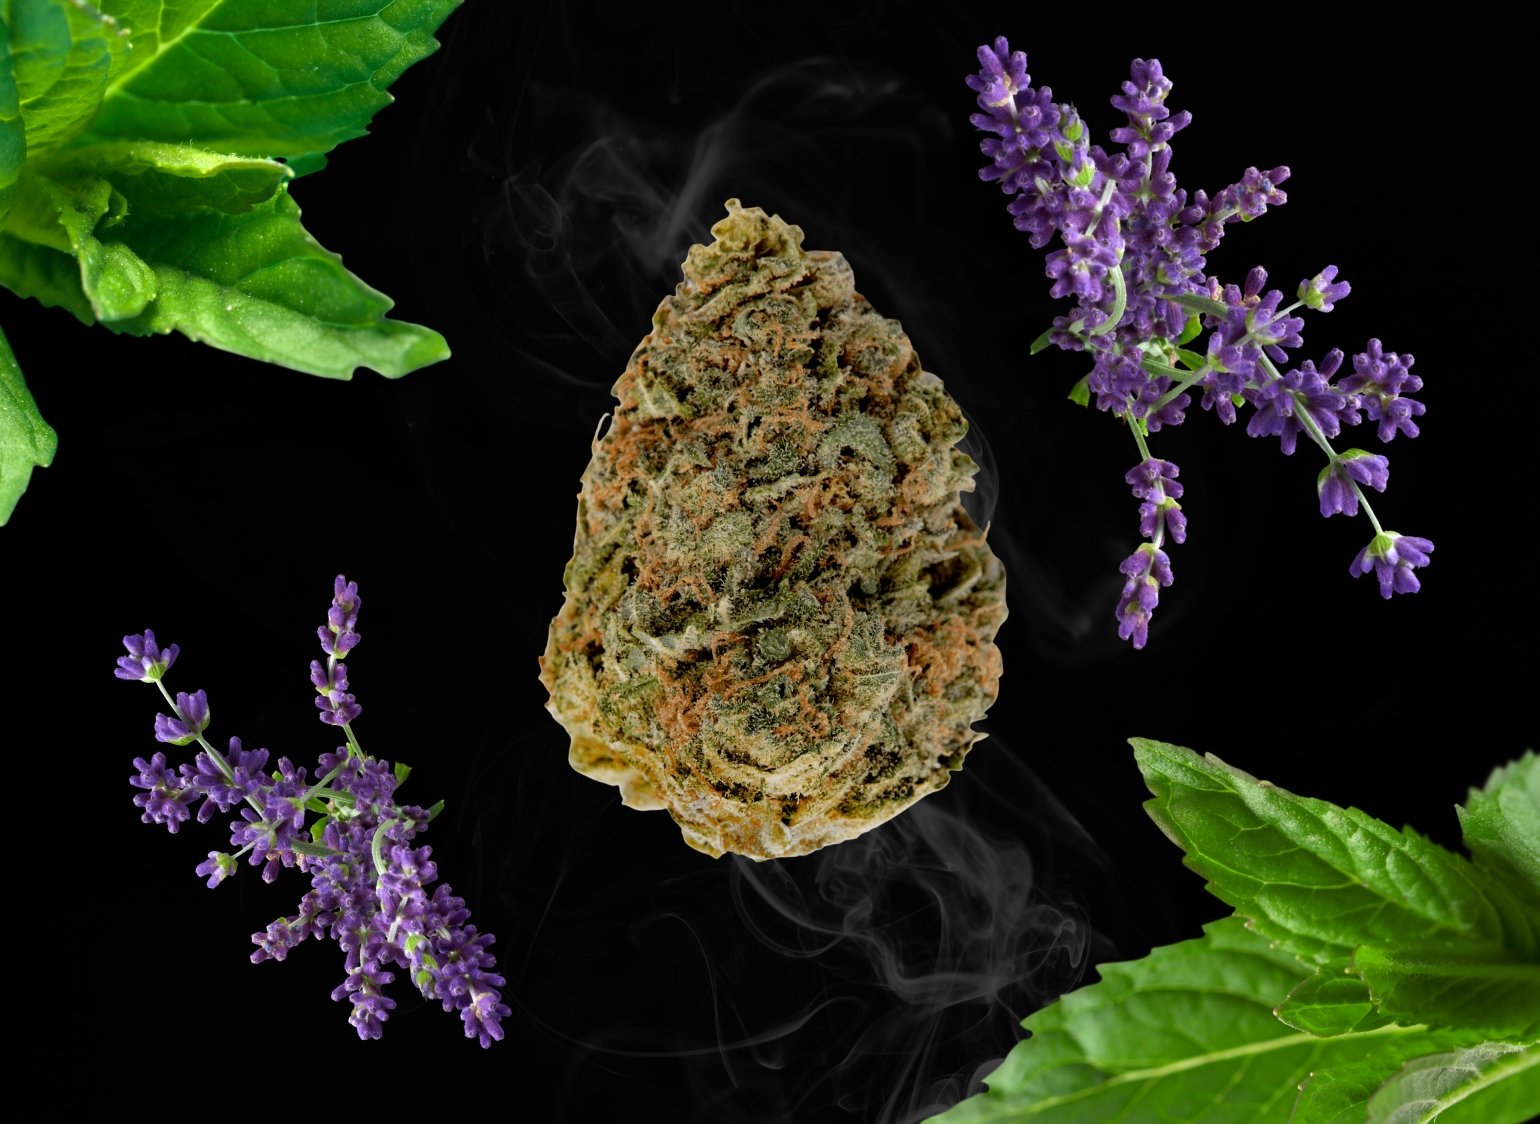 Step into the world of terpenes with a spotlight on linalool. Learn about this aromatic compound found in cannabis and other plants, celebrated for its calming and soothing properties.